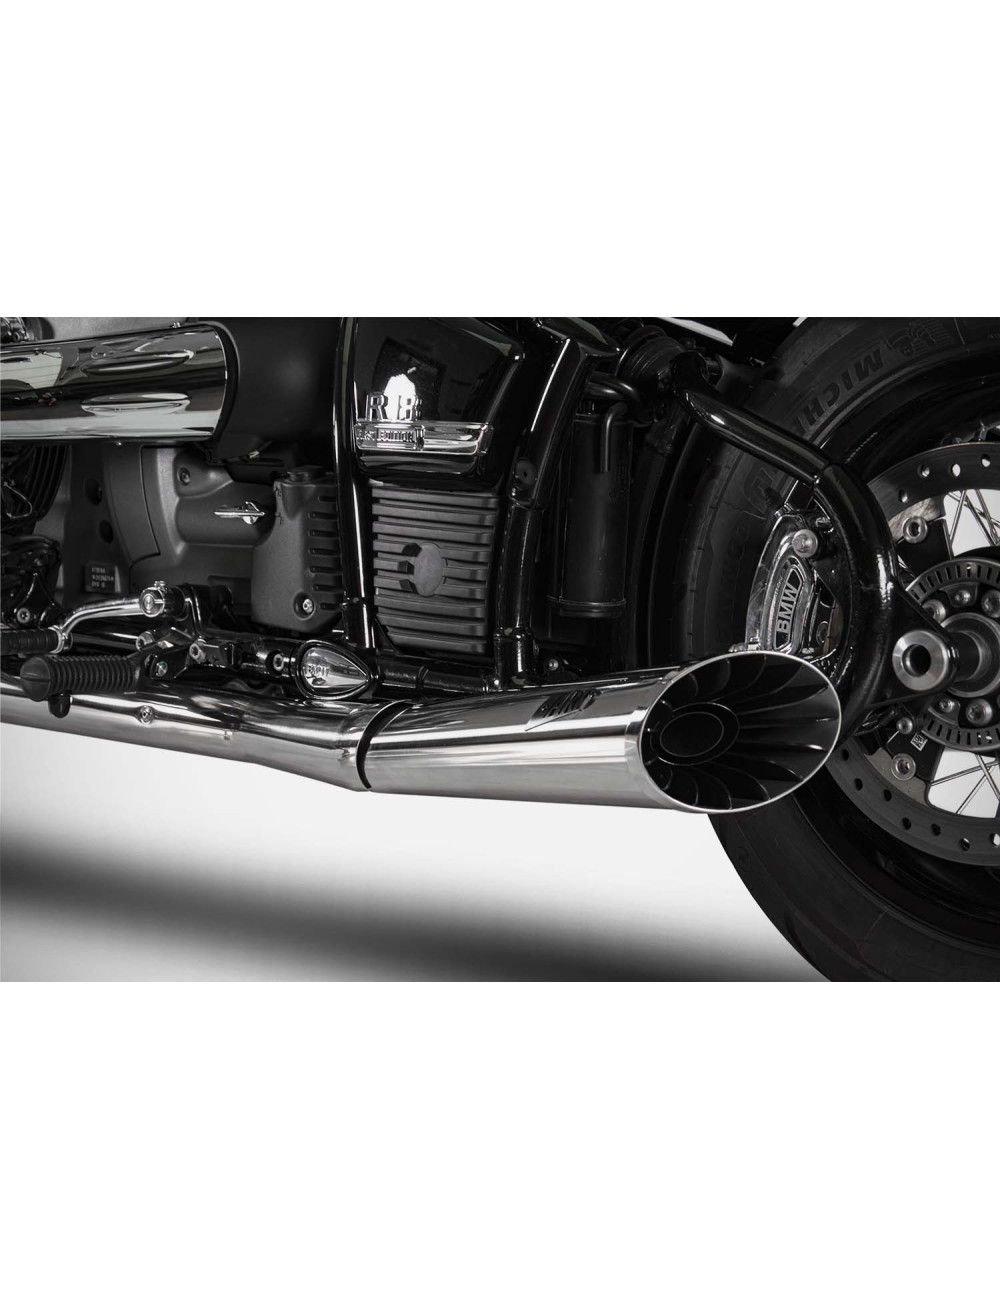 BMW R 18 exhaust SLIP-ONS